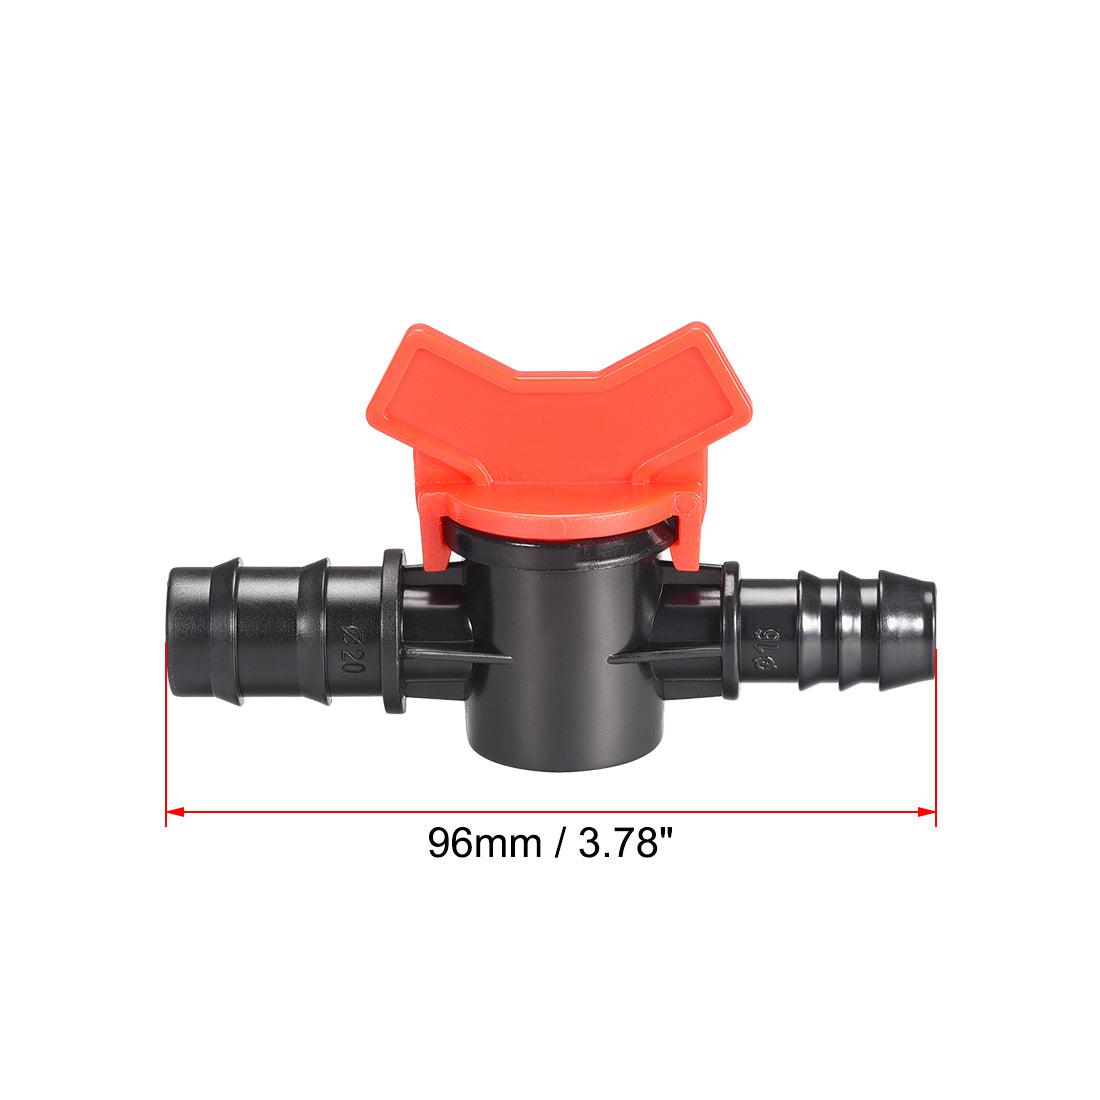 uxcell Uxcell Drip Irrigation Barbed Valve for 1/2-inch x 5/8-inch Double Male Barbed Valve Aquarium Water Flow Control Plastic Valve 3pcs